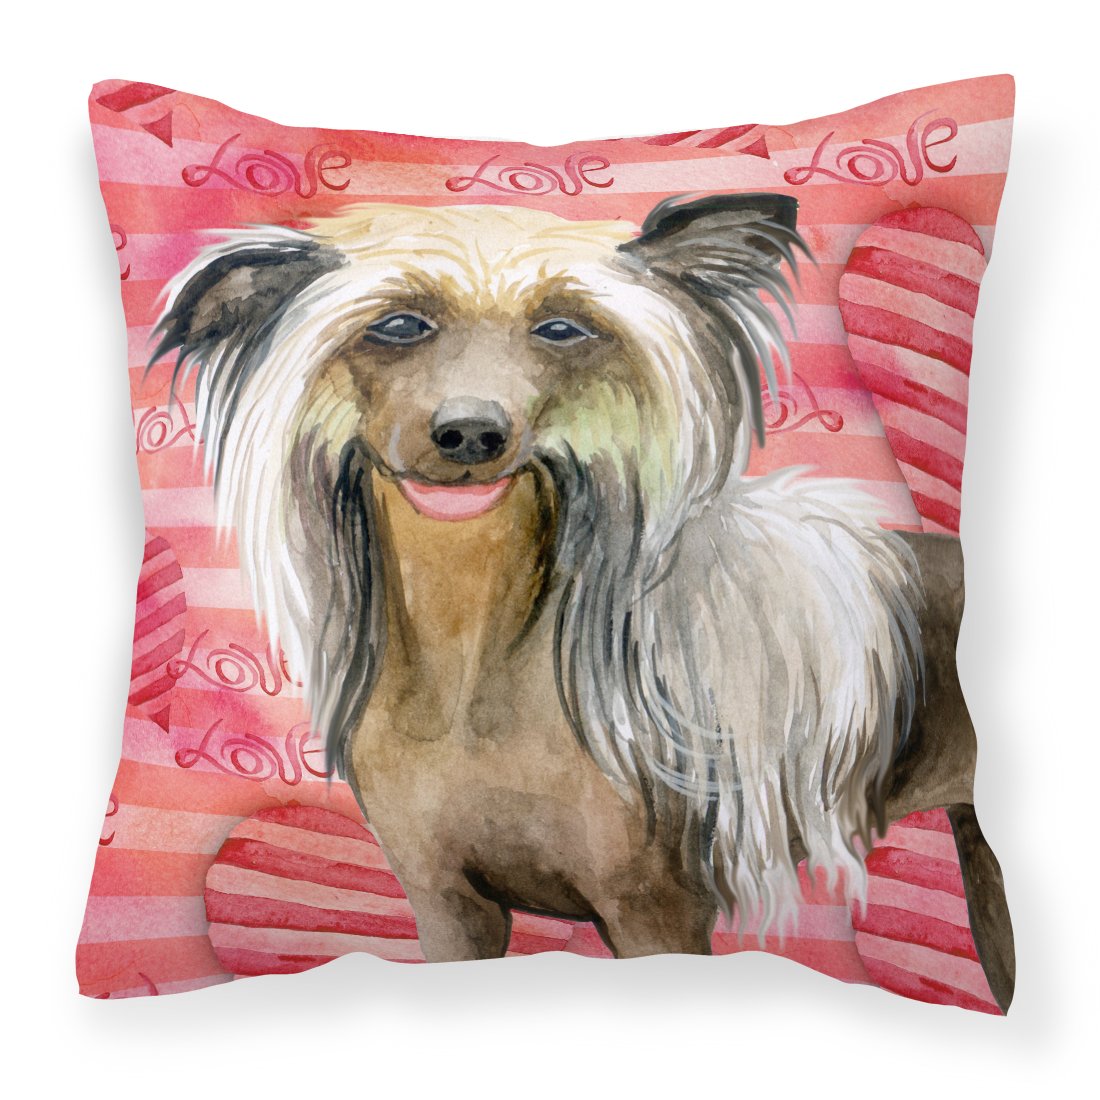 Chinese Crested Love Fabric Decorative Pillow BB9746PW1818 by Caroline's Treasures